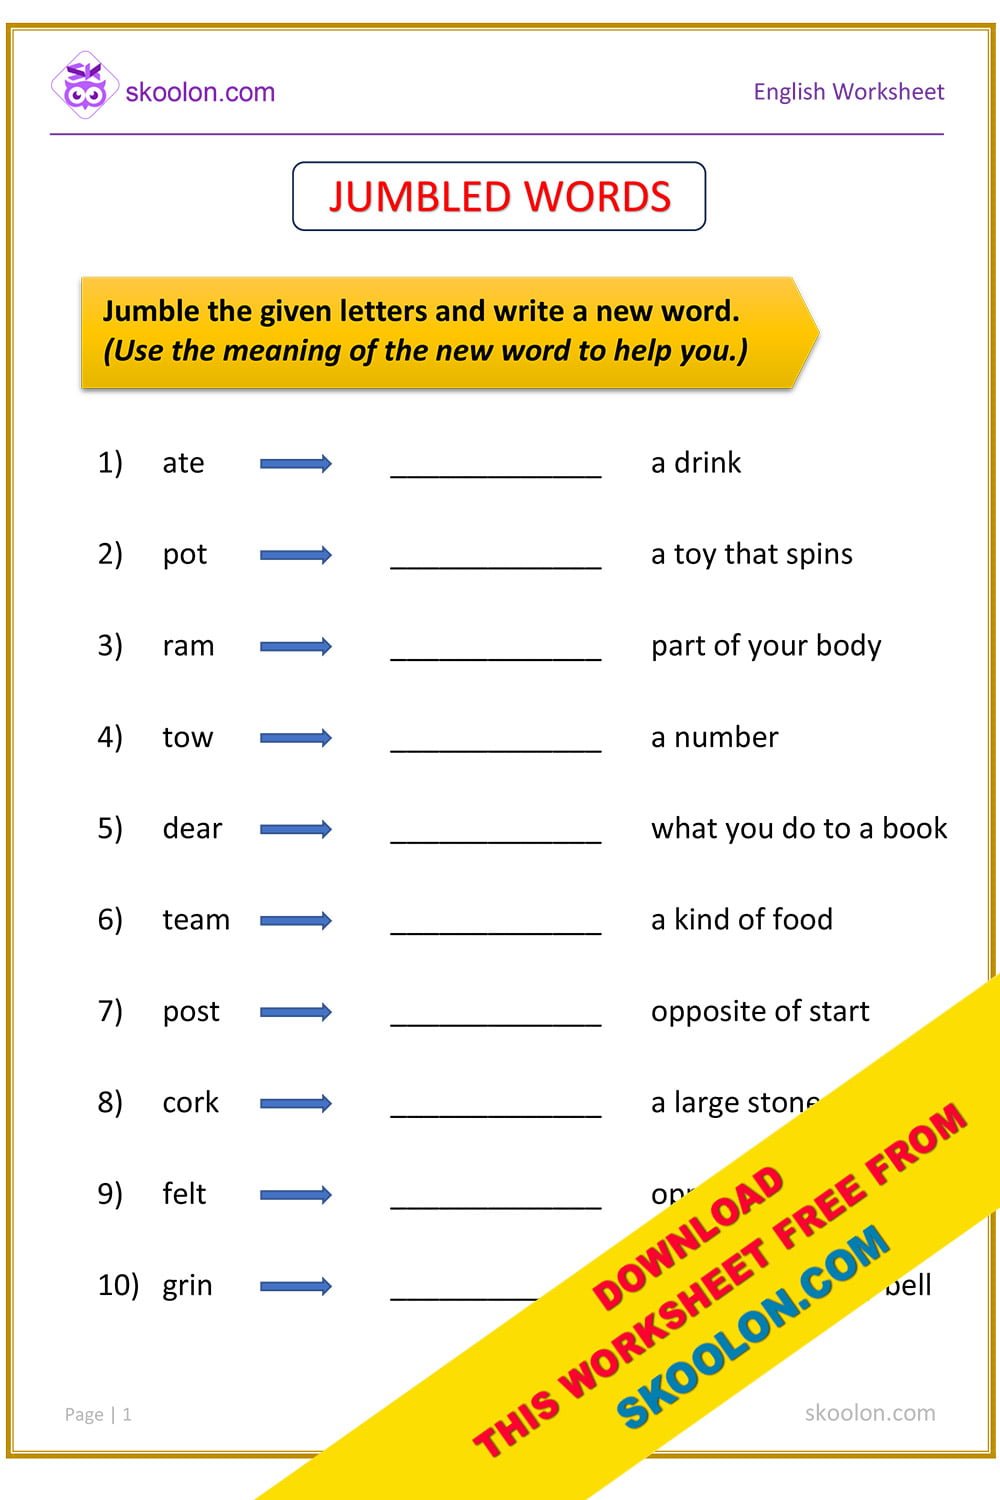 Jumbled Words Worksheets For Class 3 Archives Skoolon